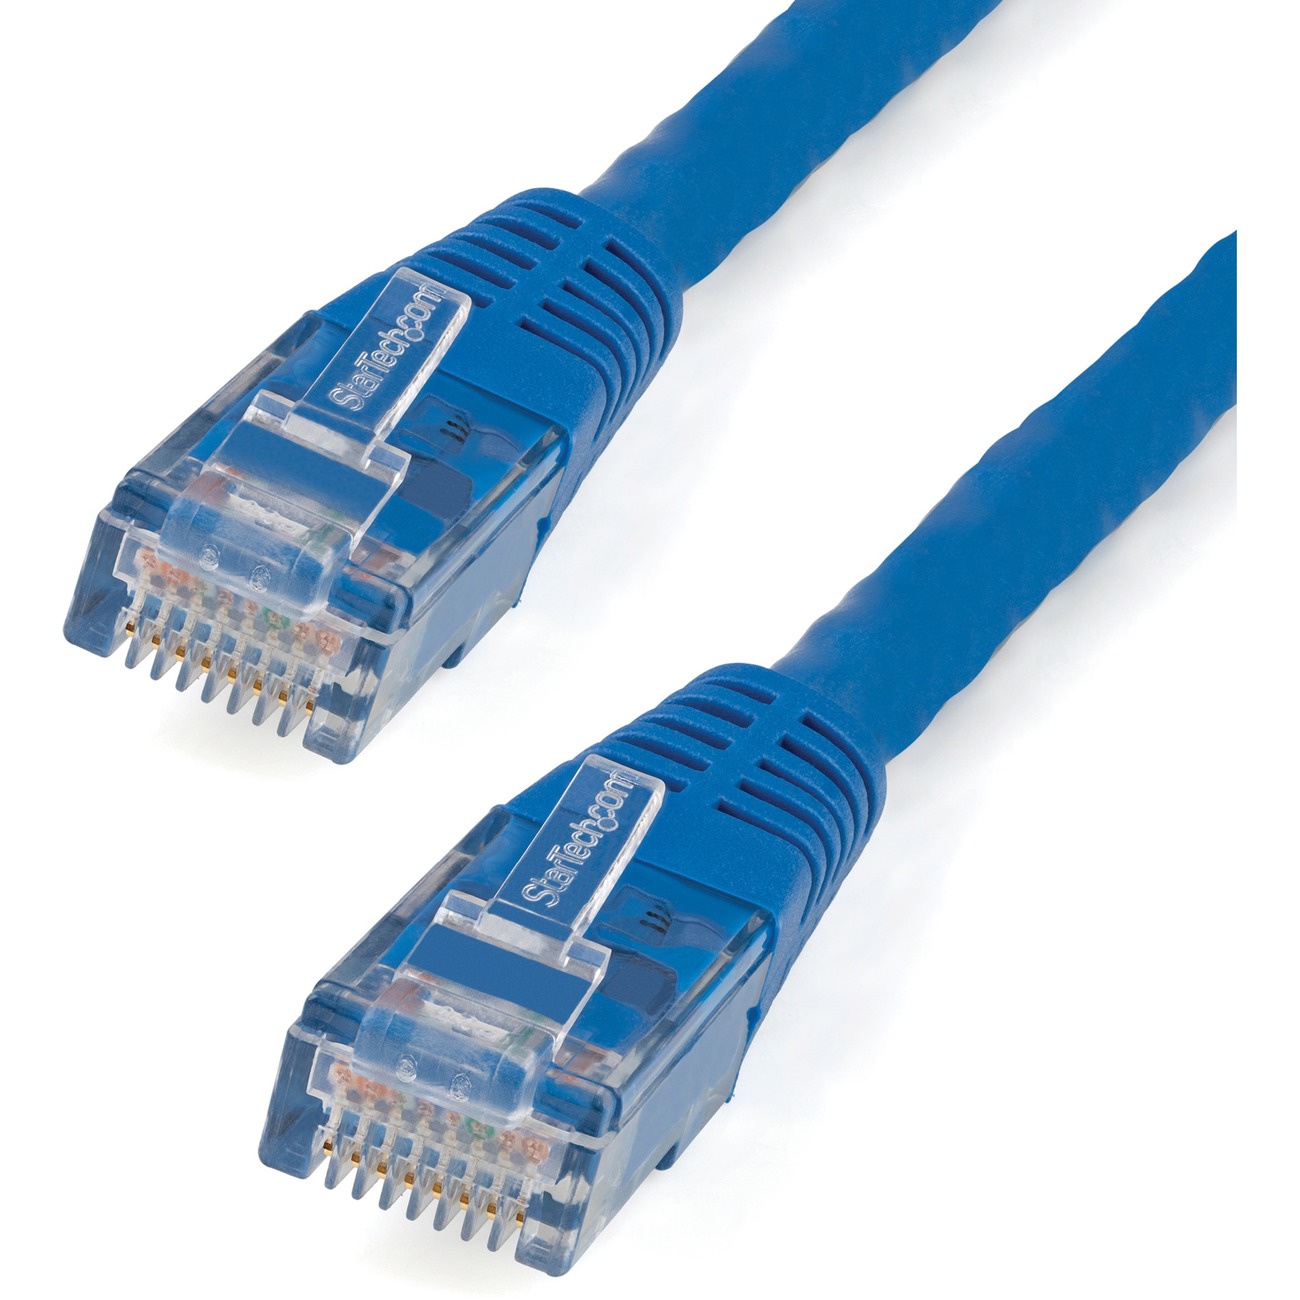 10Gbps Snagless Cat6 Ethernet Cable 6m (Cat6 Cable, Cat 6 Cable